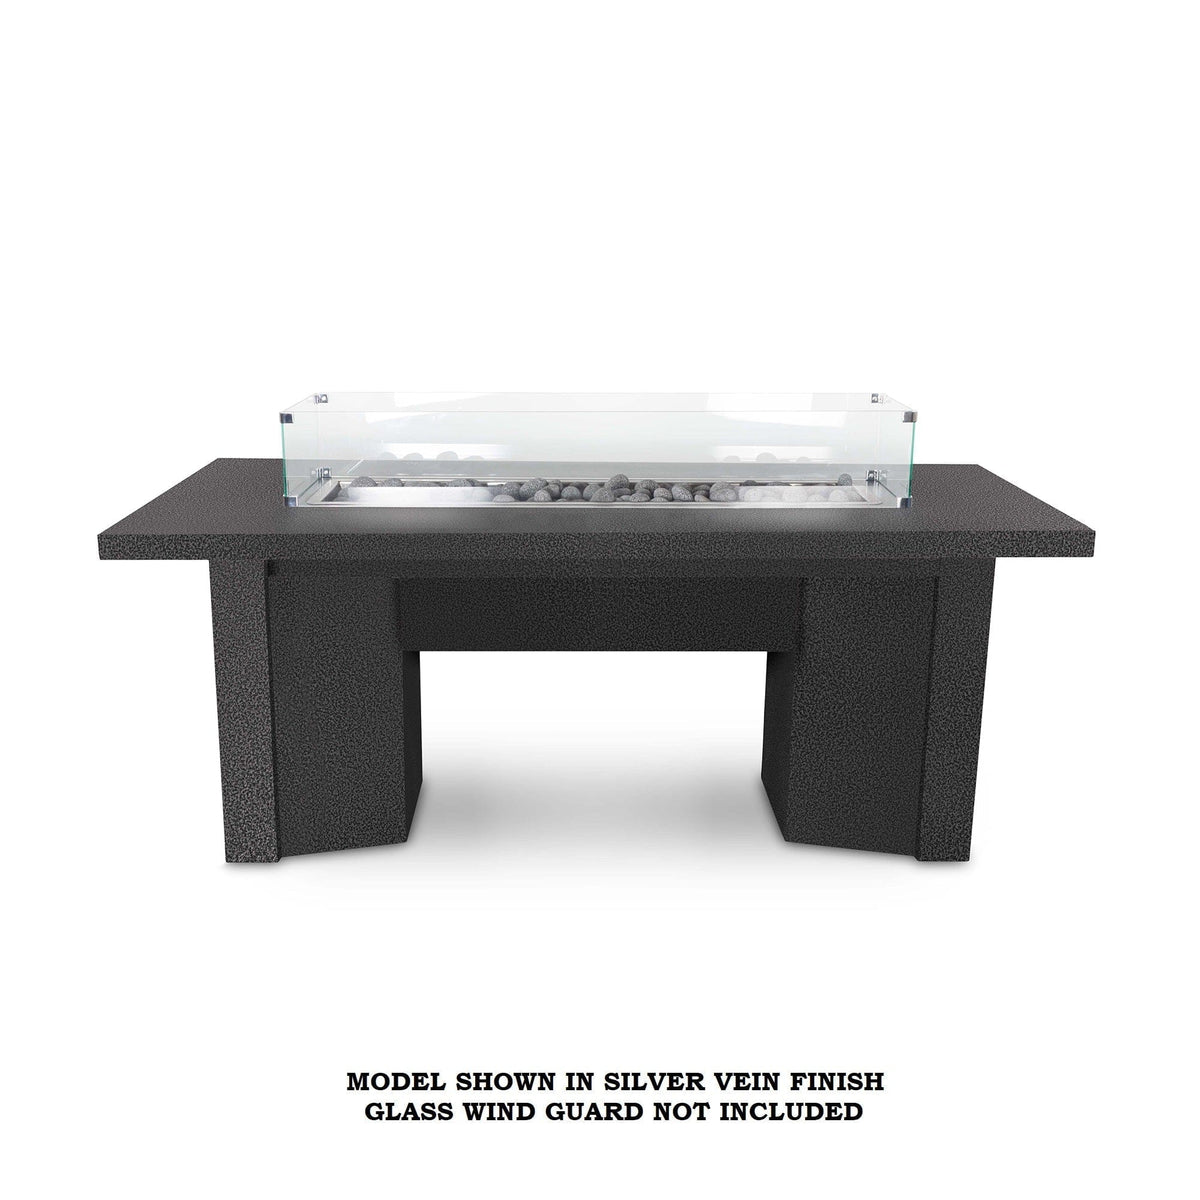 The Outdoor Plus Fire Features Match Lit Ignition / Silver Vein (-SLV) / Natural Gas The Outdoor Plus 48&quot; Alameda Linear Powder Coated Rectangle Fire Table / OPT-ALMPC48, OPT-ALMPC48FSML, OPT-ALMPC48FSEN, OPT-ALMPC48E12V, OPT-ALMPC48EKIT